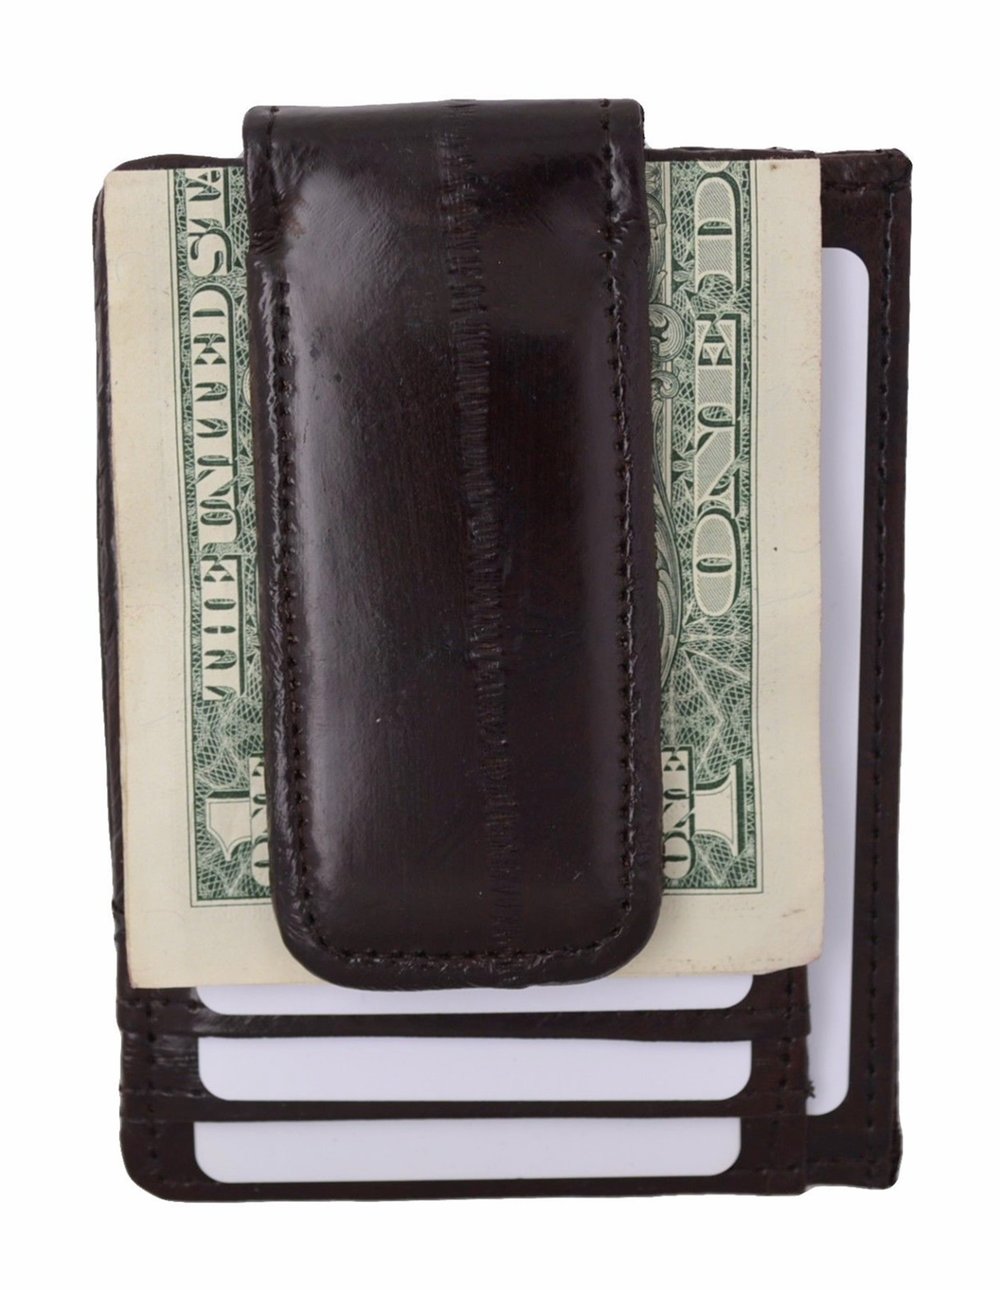 brown leather wallet. black leather Mans wallet leather case money clip credit card holder with ID window 